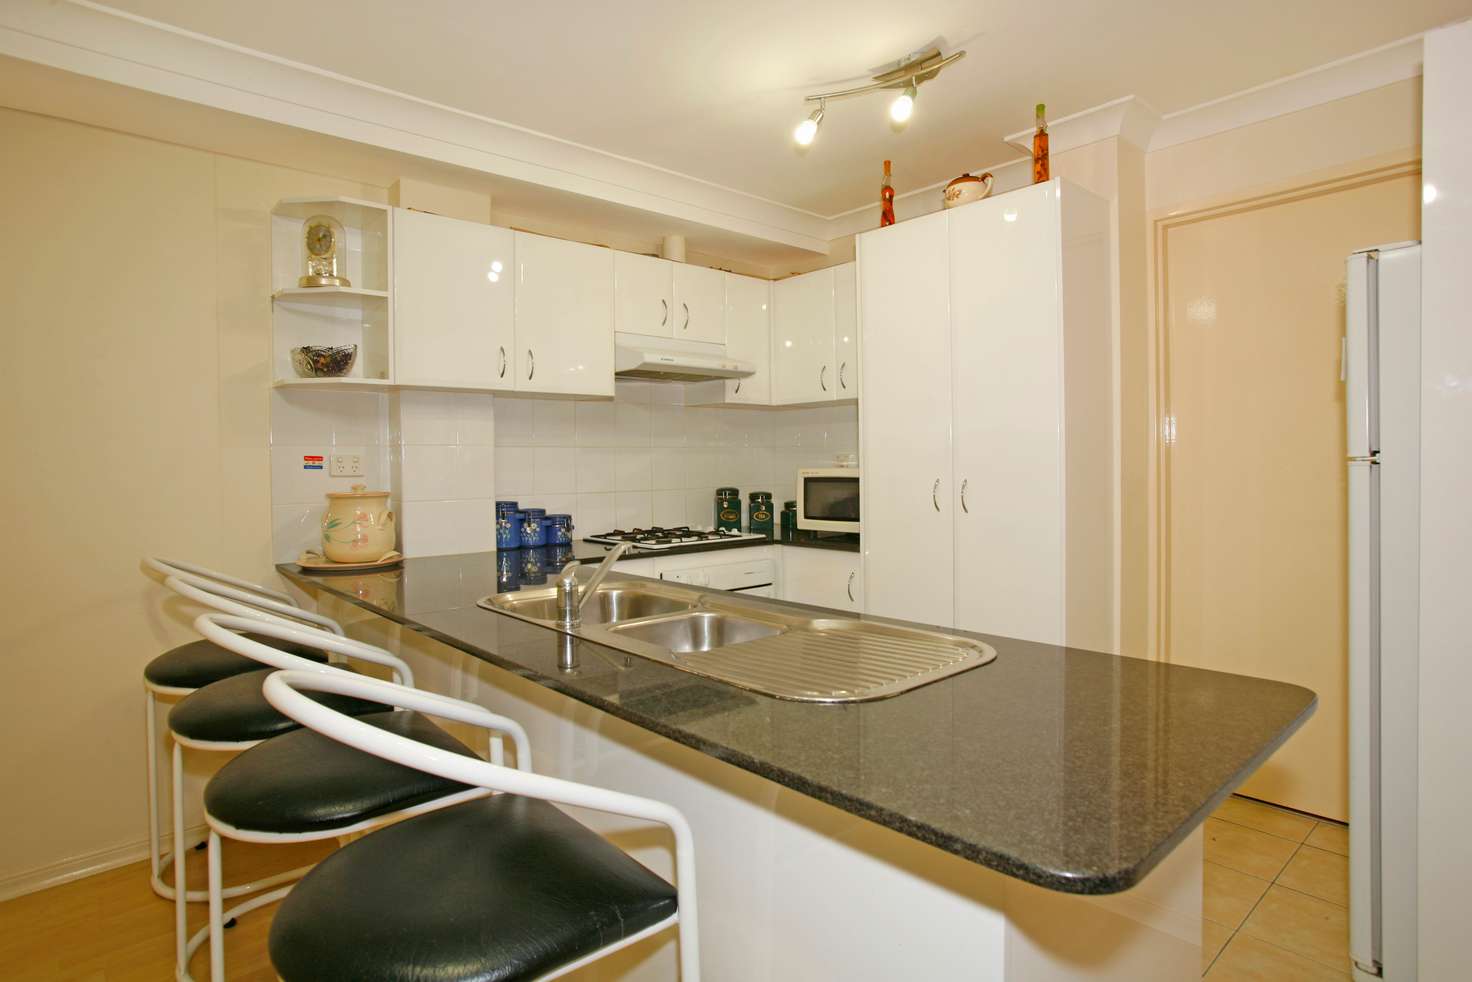 Main view of Homely apartment listing, 424 Railway Parade, Allawah NSW 2218